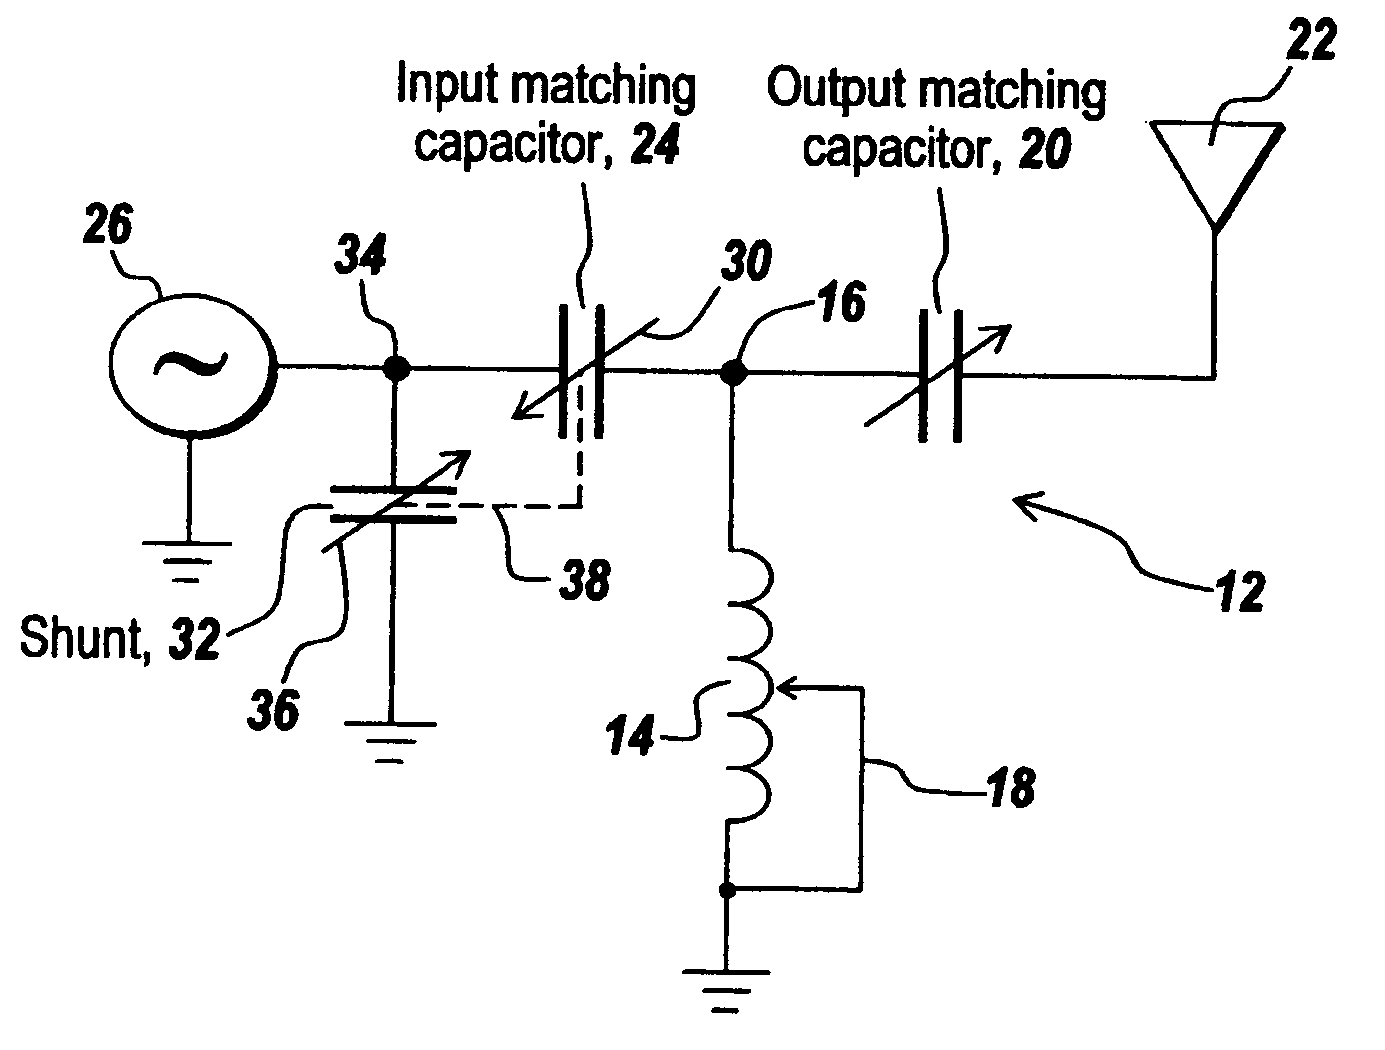 Extended matching range tuner